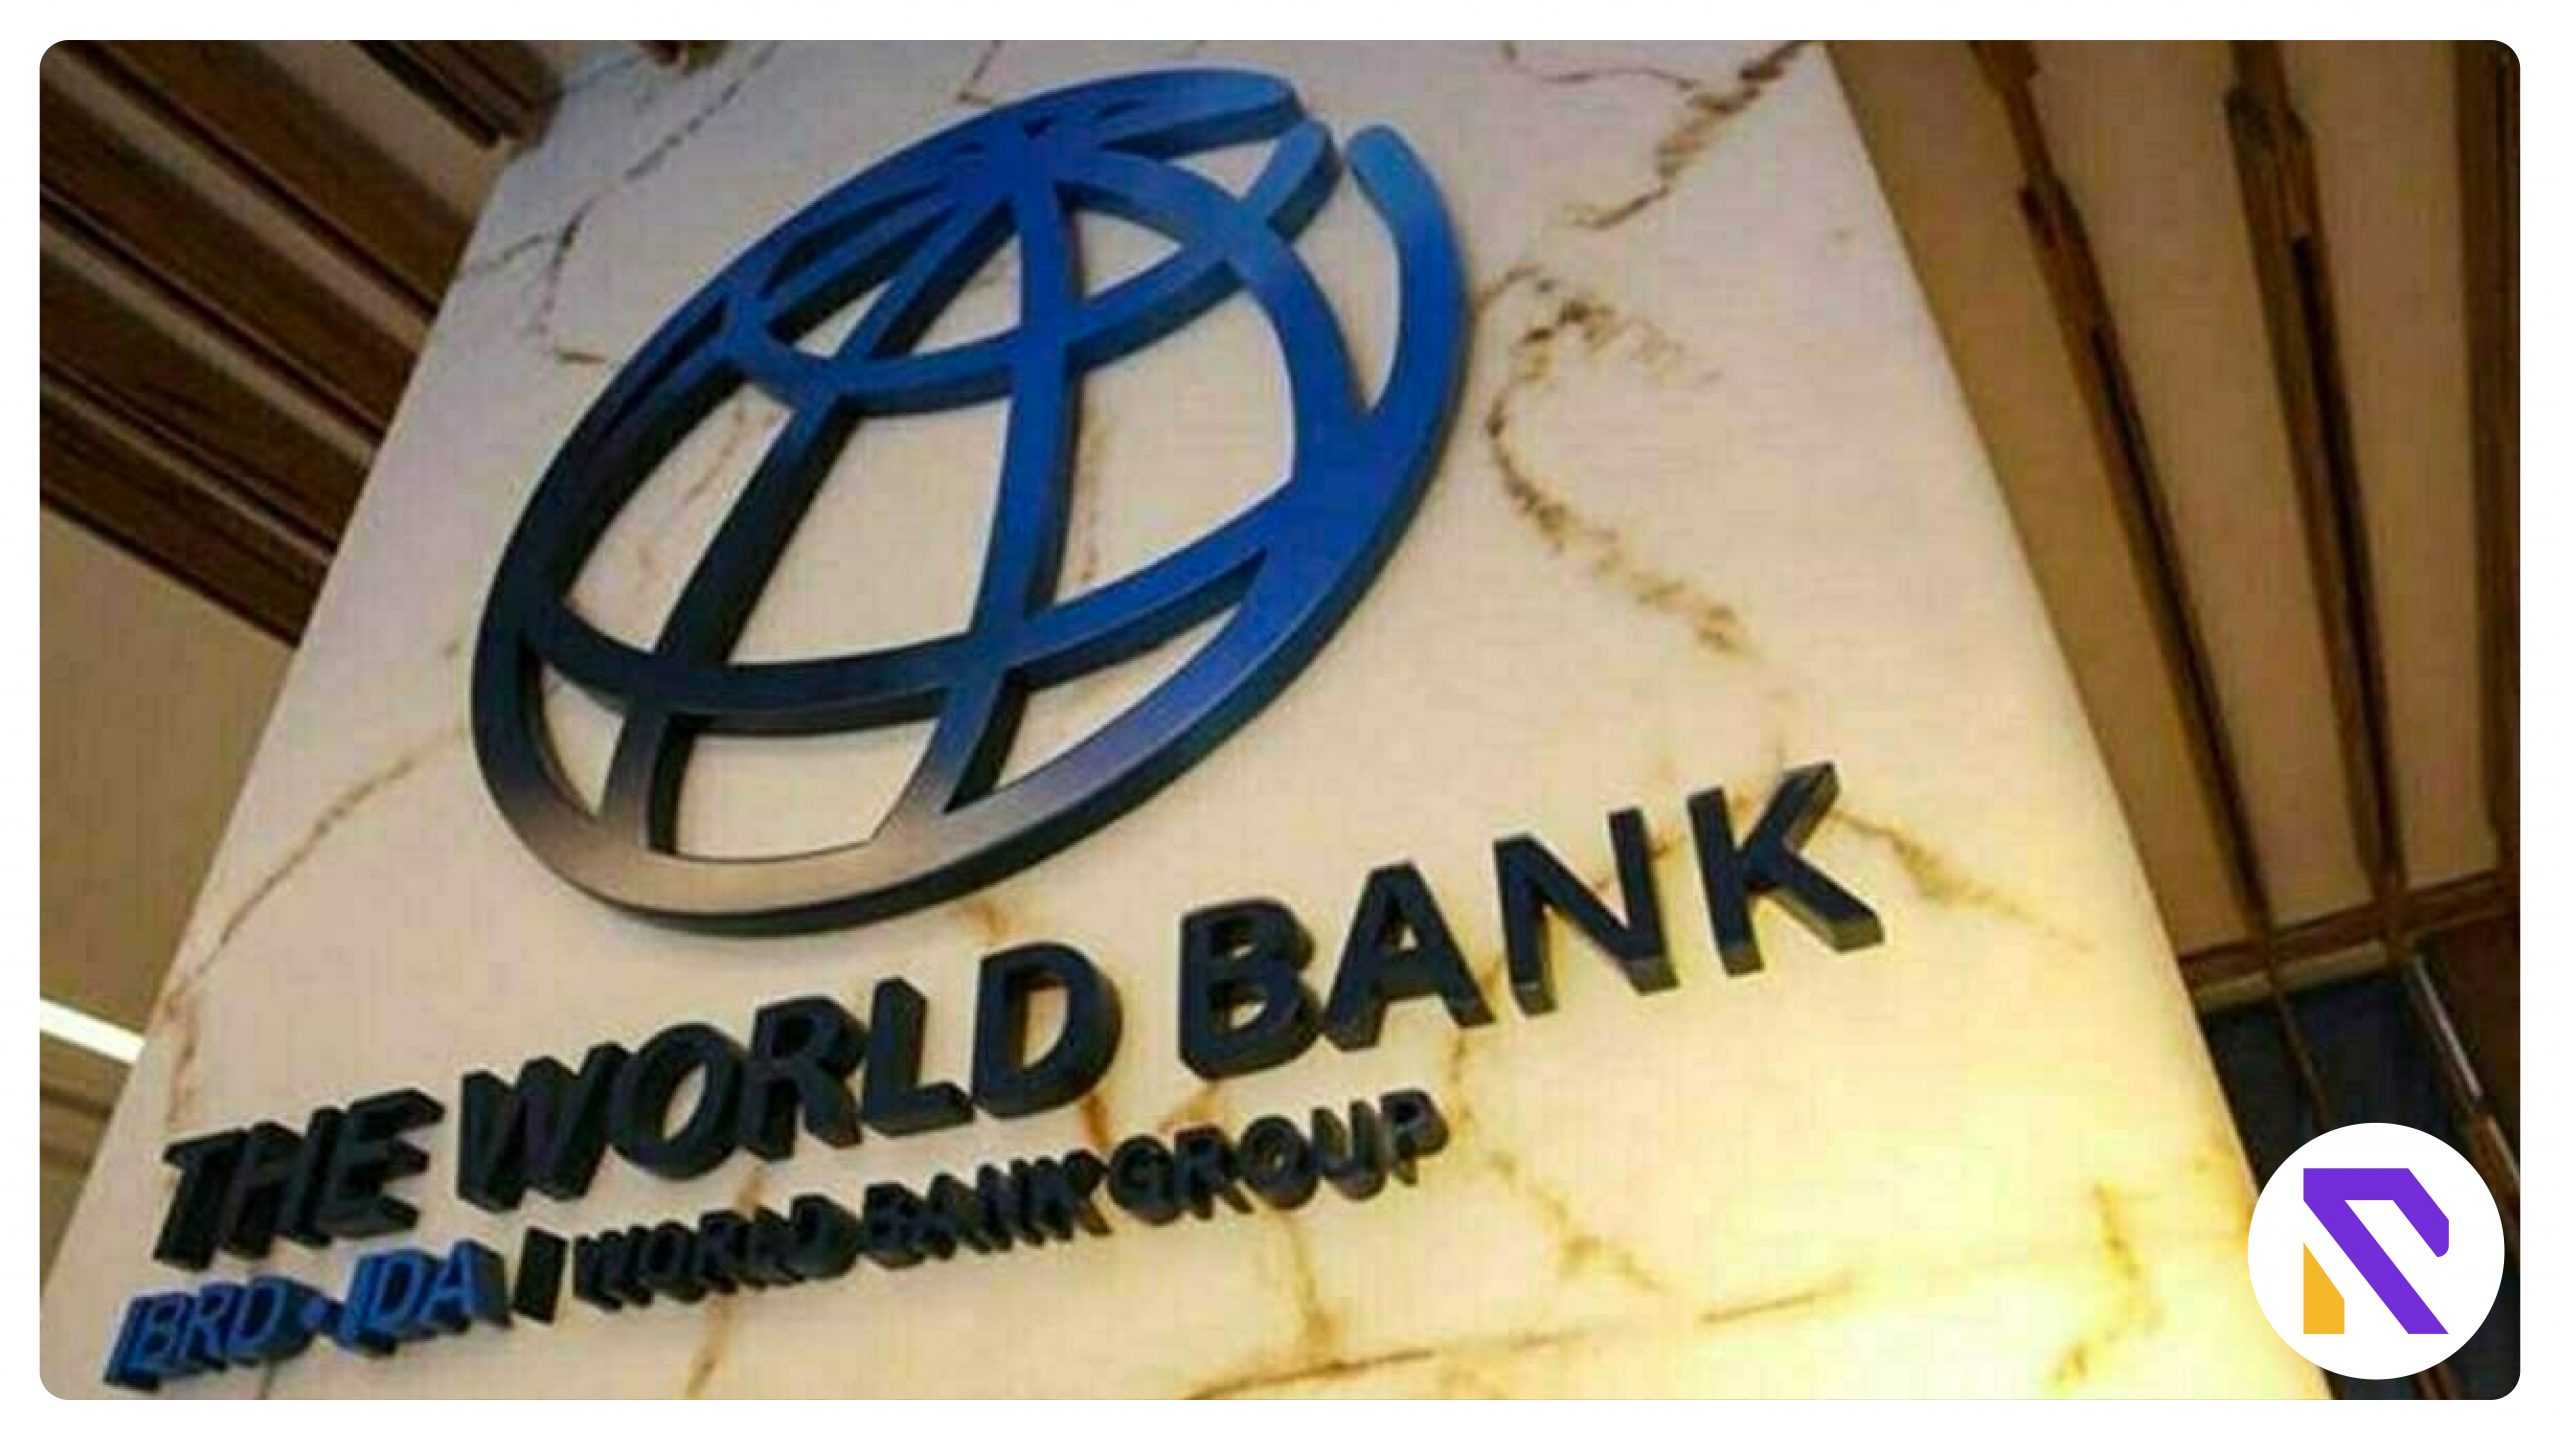 Agreement of 85M Dollars for Pakistan Housing Finance Project signed between World Bank and Pakistan